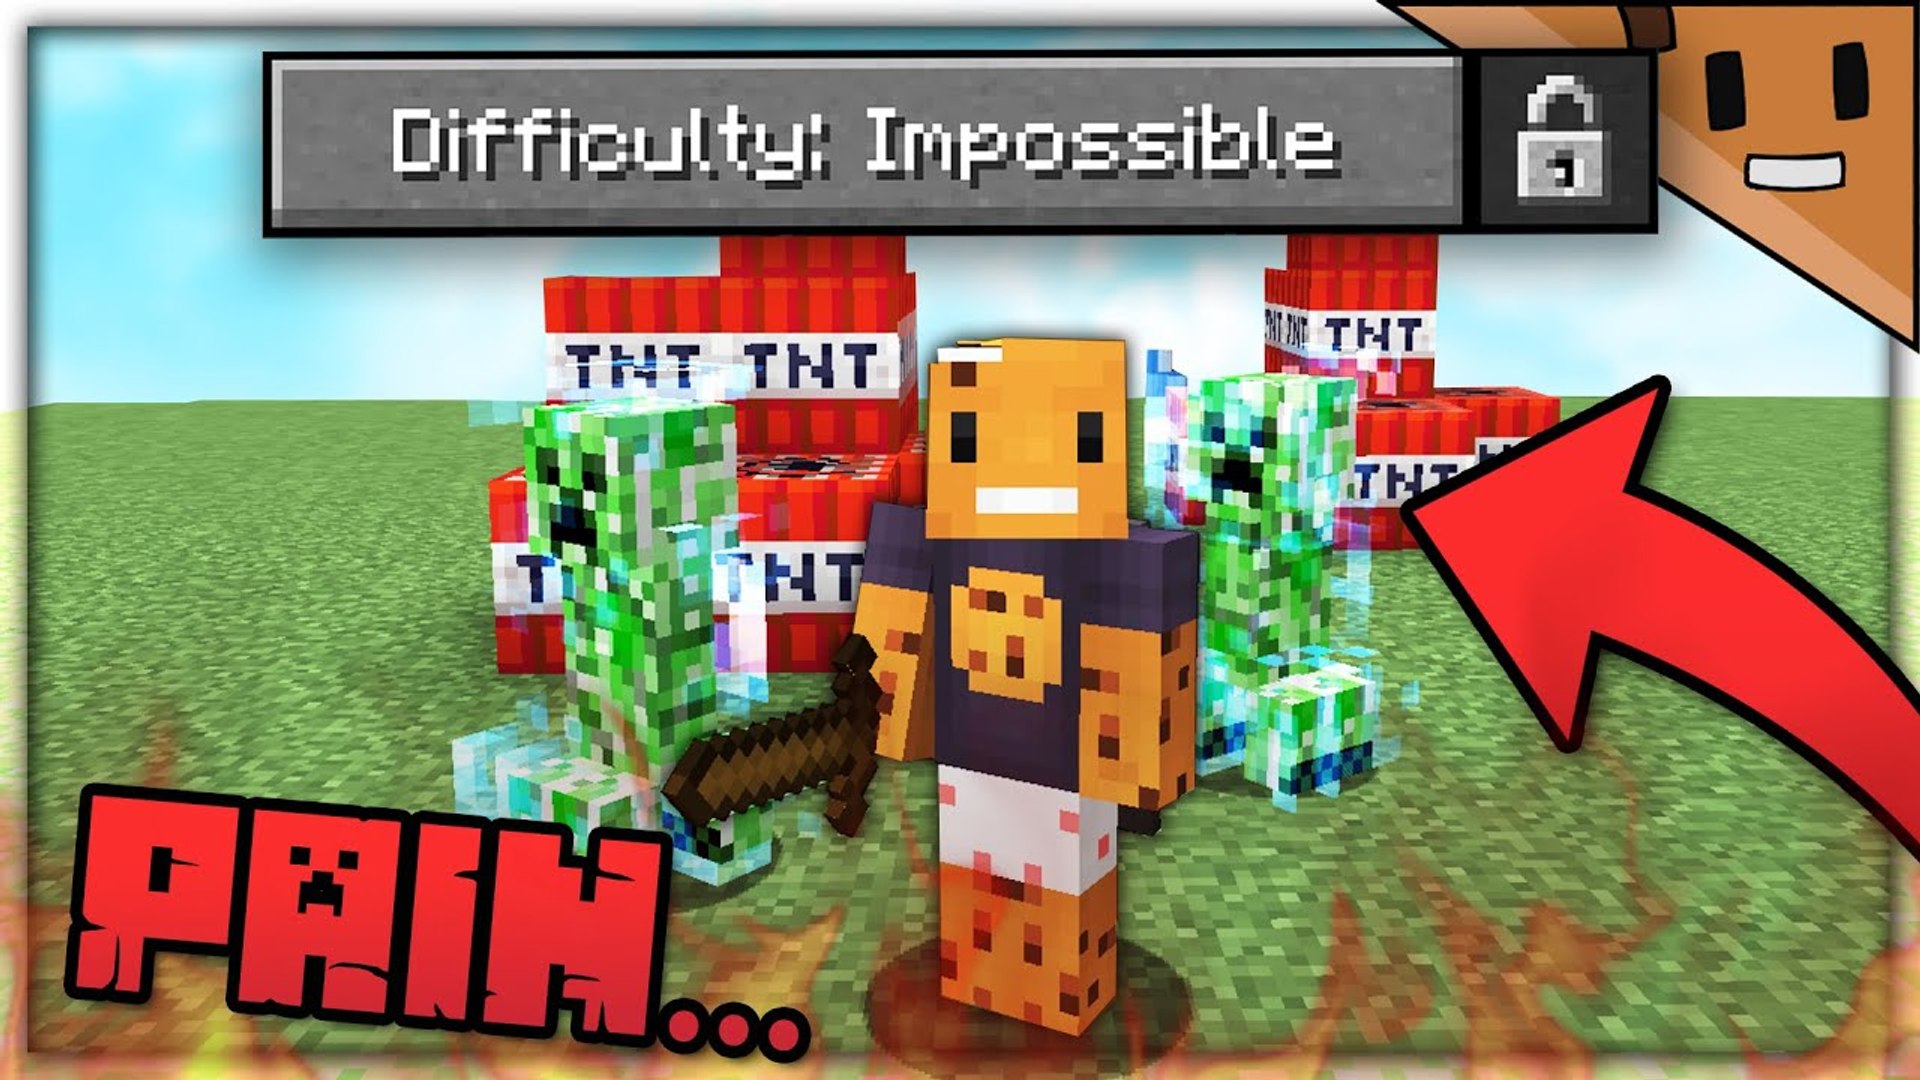 So I made Minecraft ACTUALLY impossible 